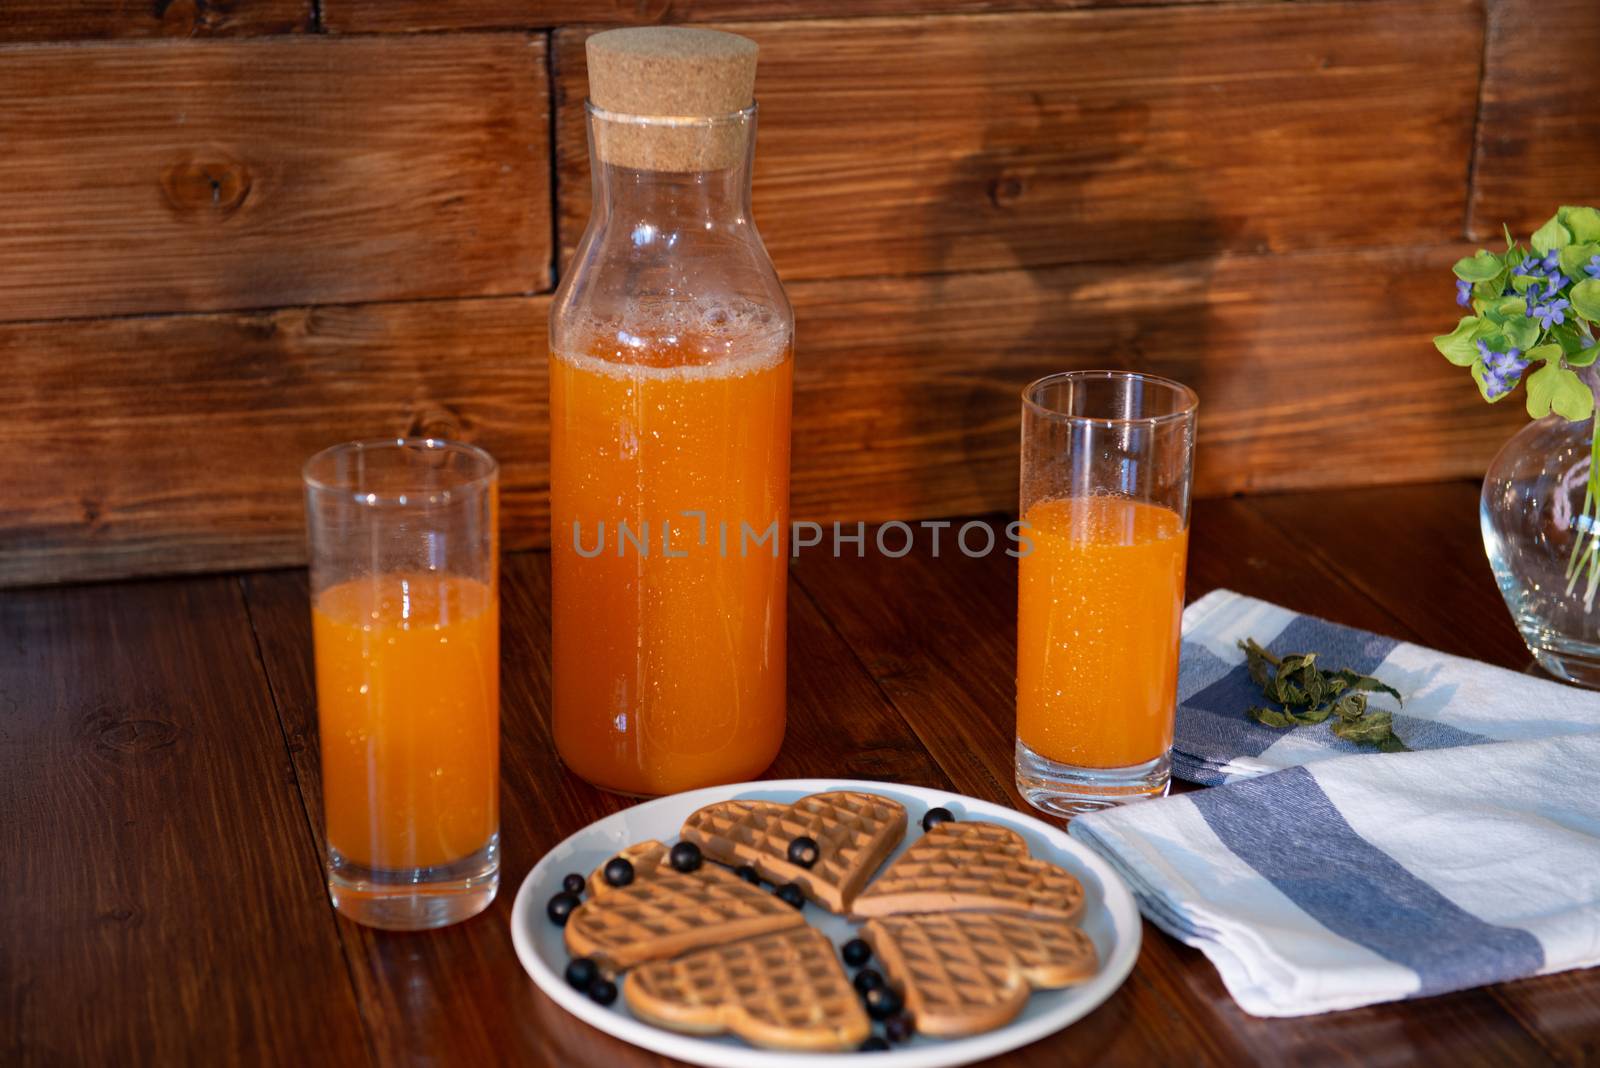 breakfast for two. freshly squeezed juice and wafers